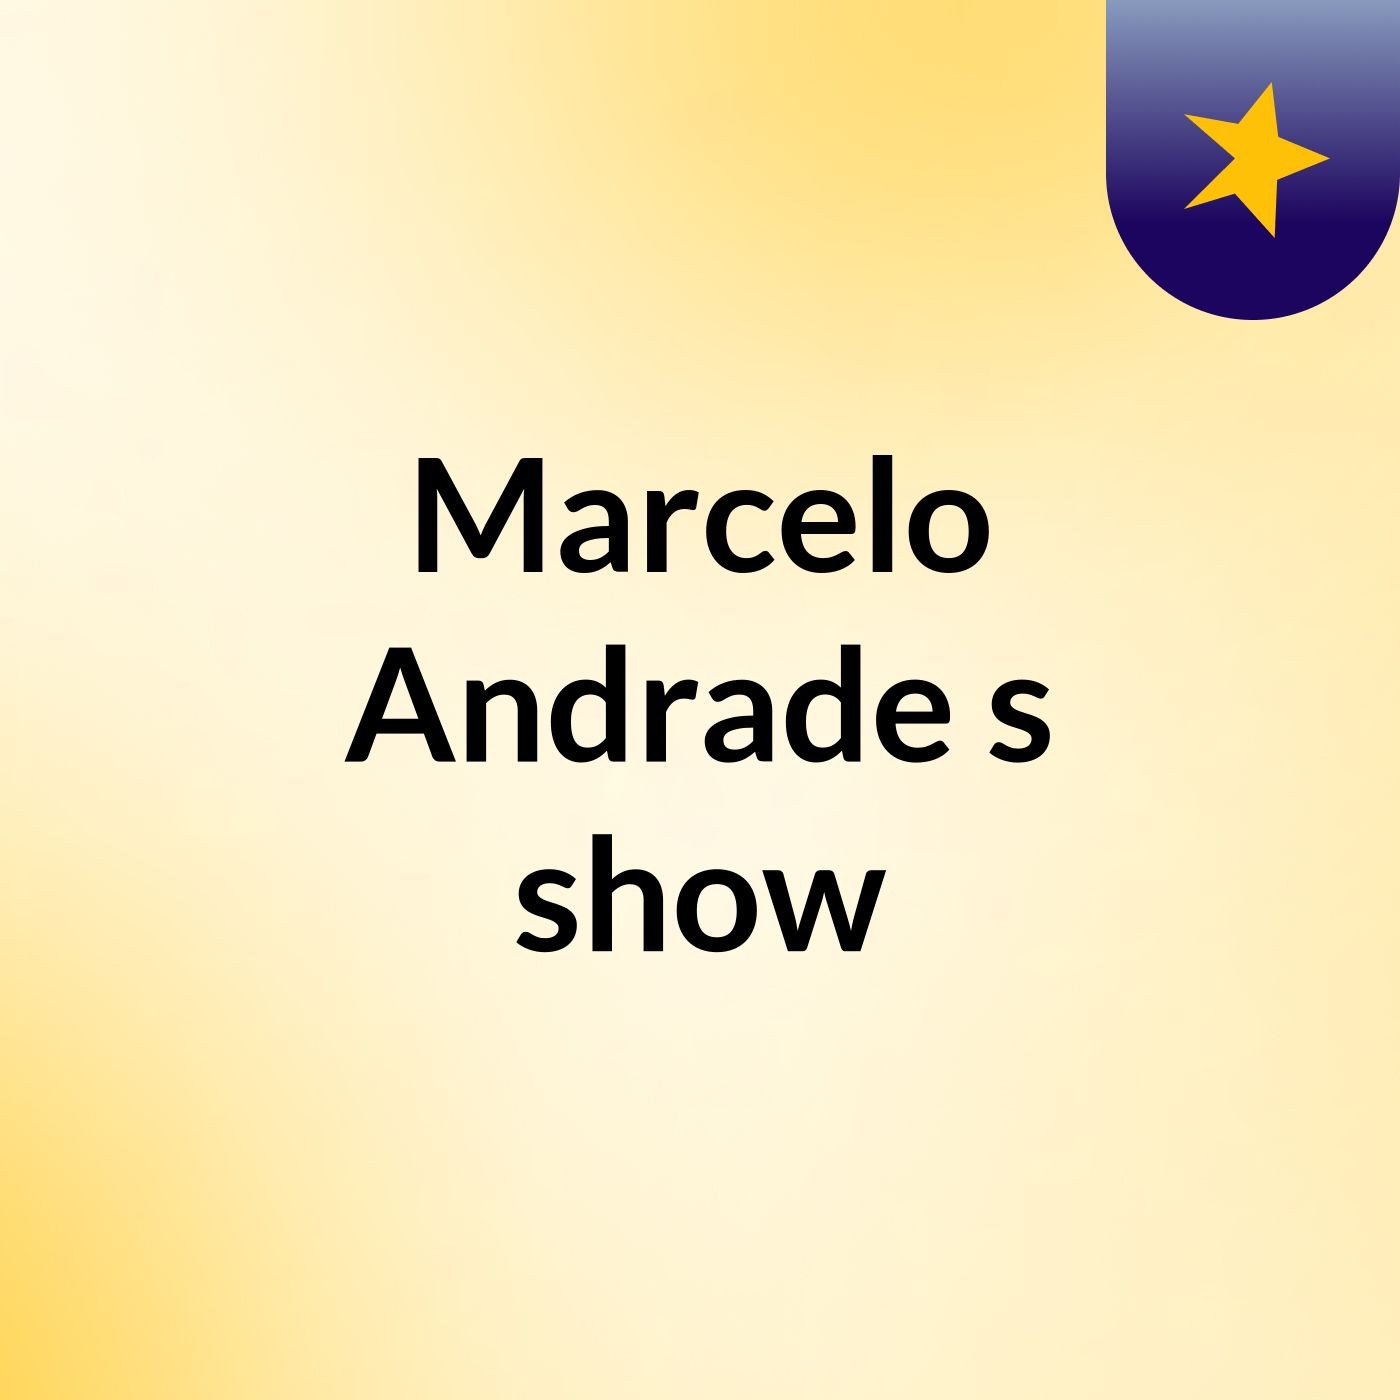 Marcelo Andrade's show